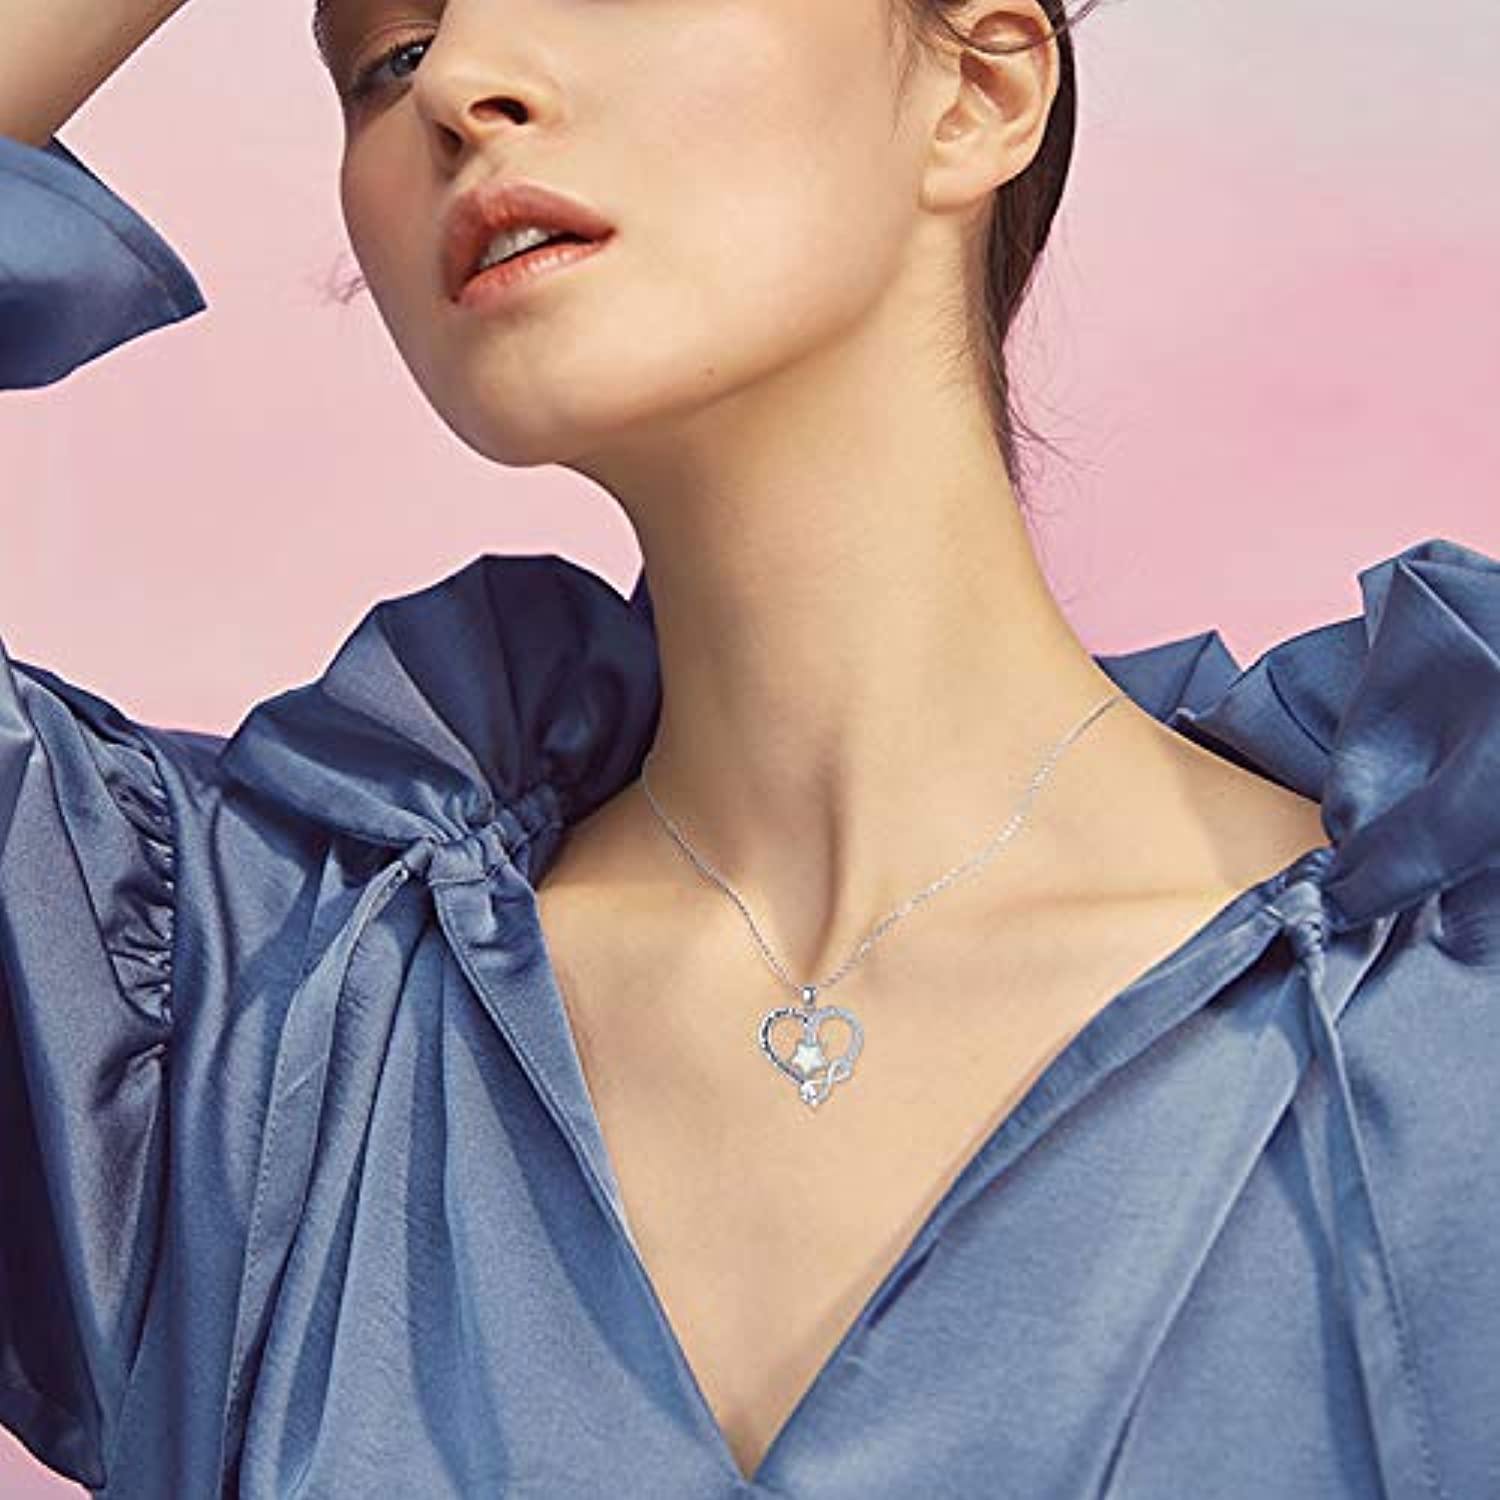 Opal Star Necklace Love Heart Infinity Pendant I Love You to The Moon and Back Sterling Silver Jewelry Gift for Women